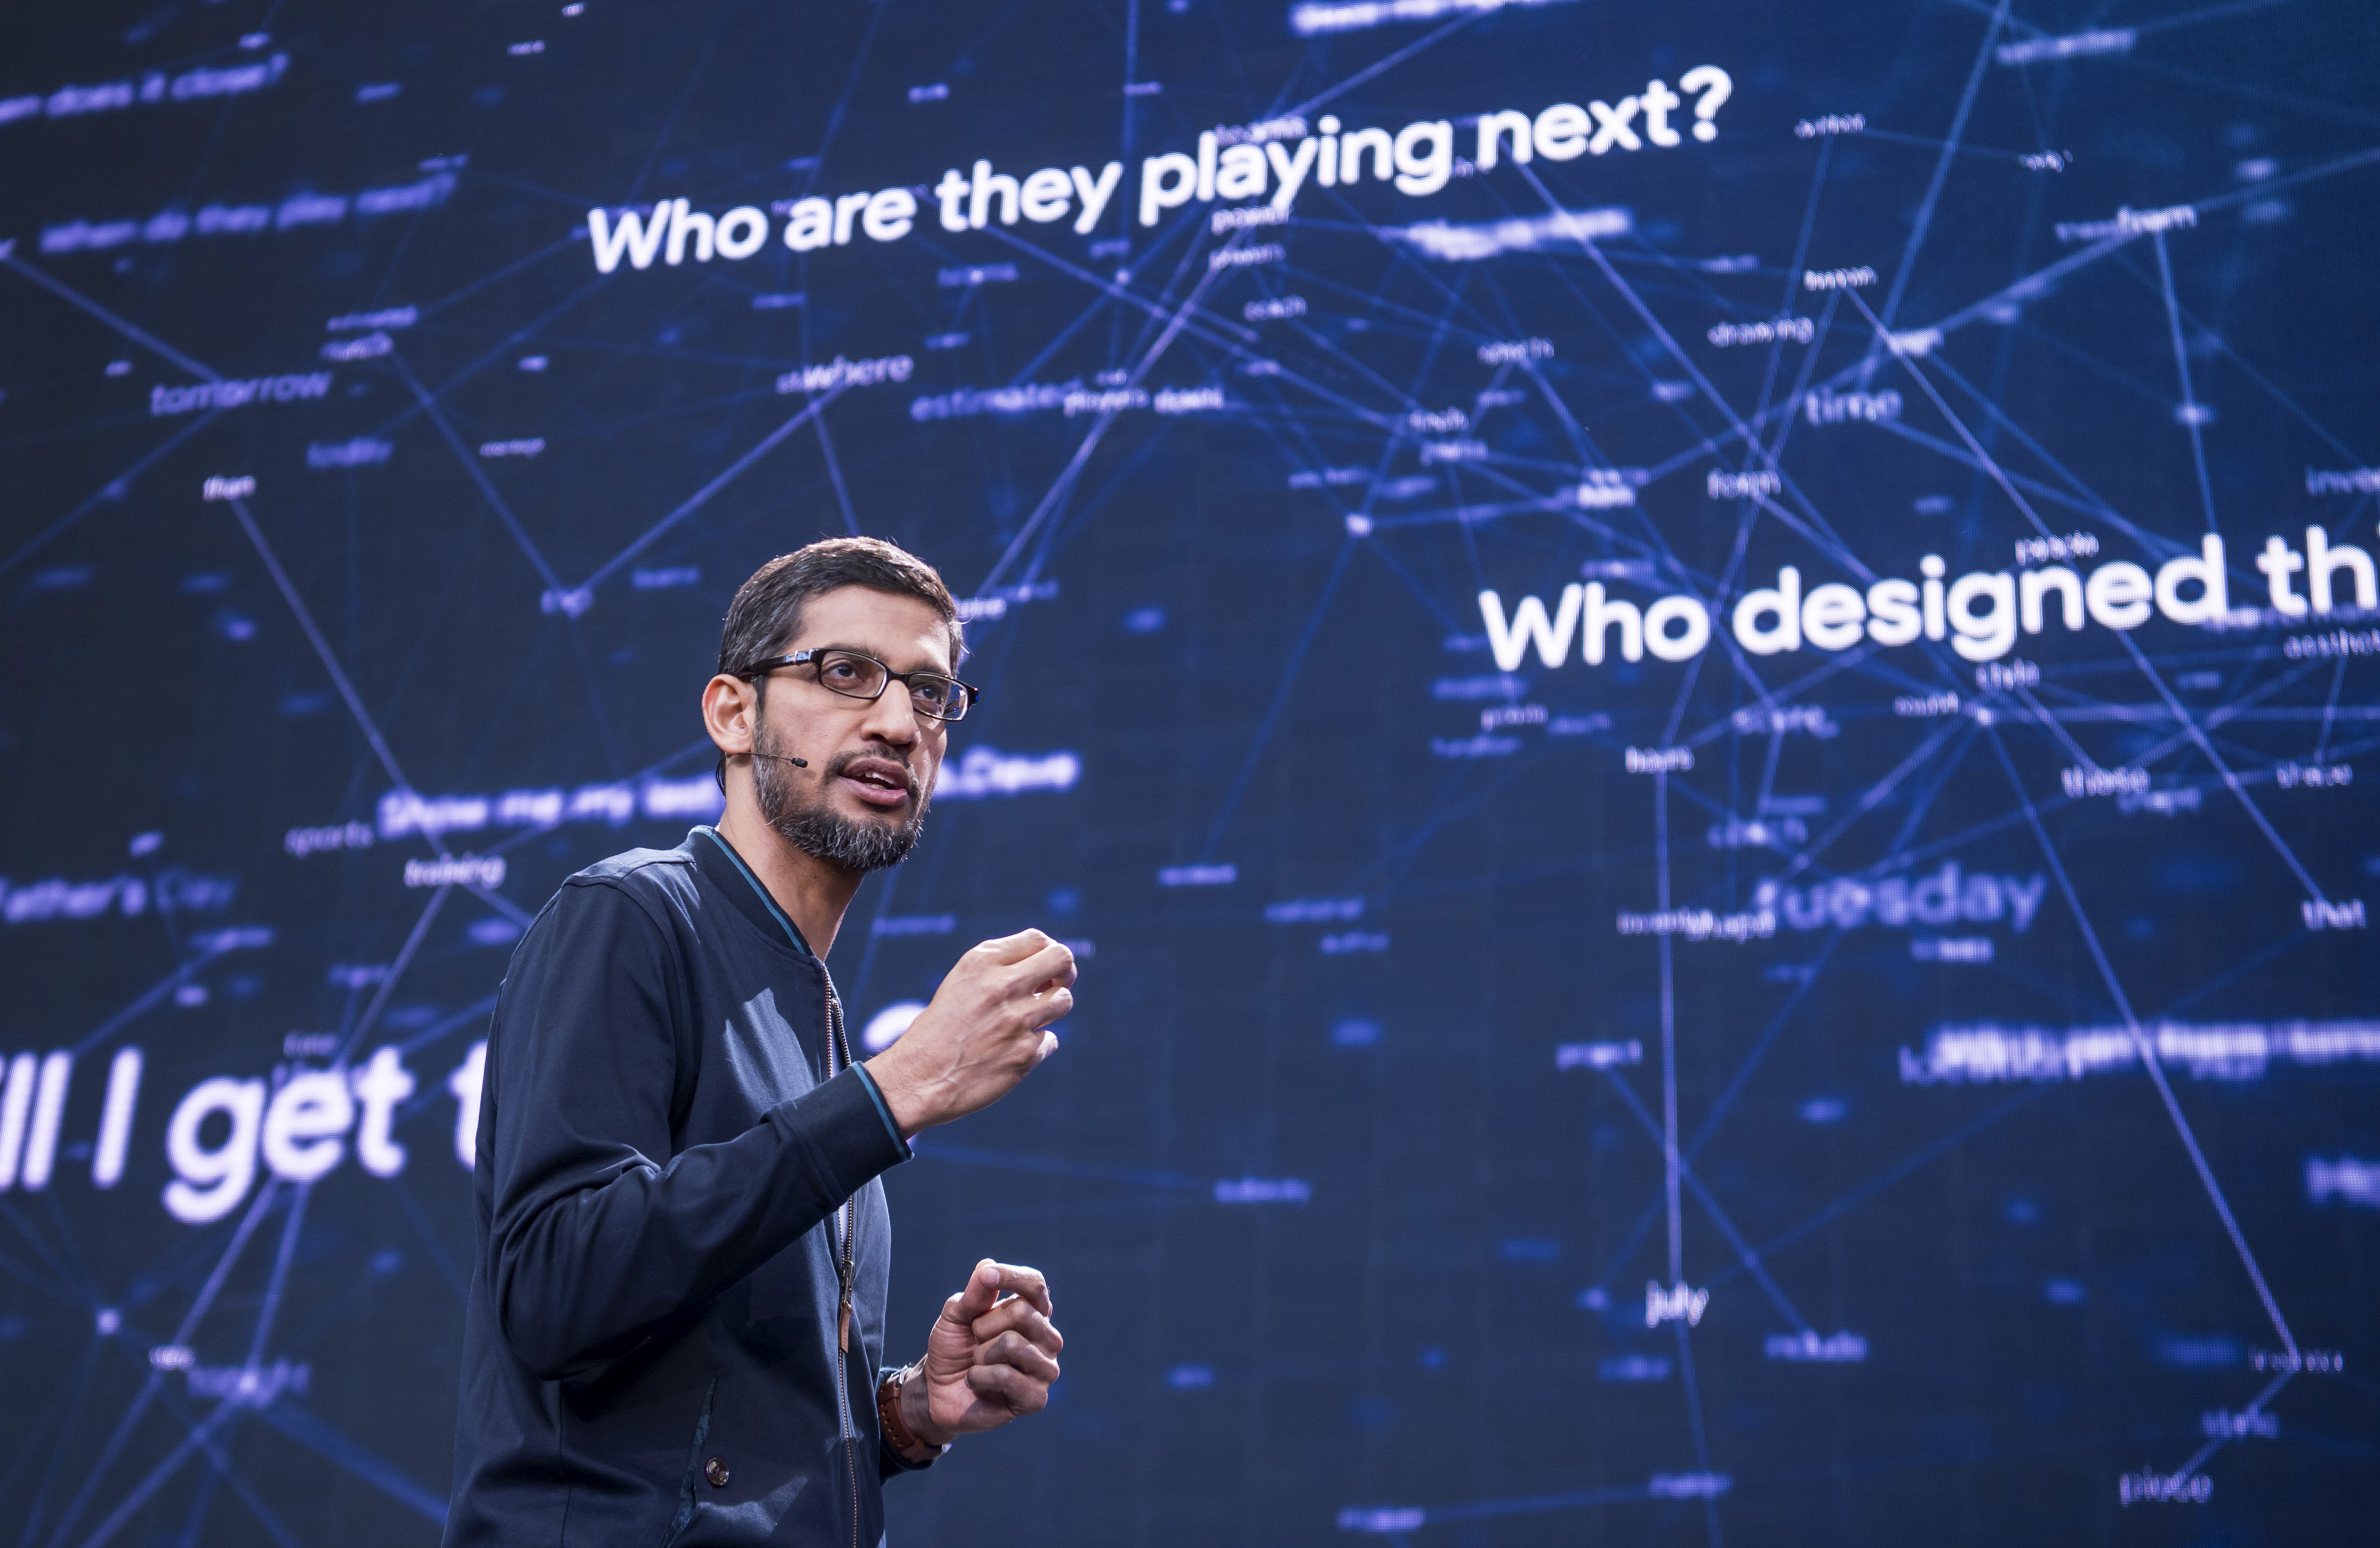 Sundar Pichai, chief executive officer of Google Inc., speaks during the Google I/O Annual Developers Conference in Mountain View, California on Wednesday, May 18, 2016. (Bloomberg via Getty Images)